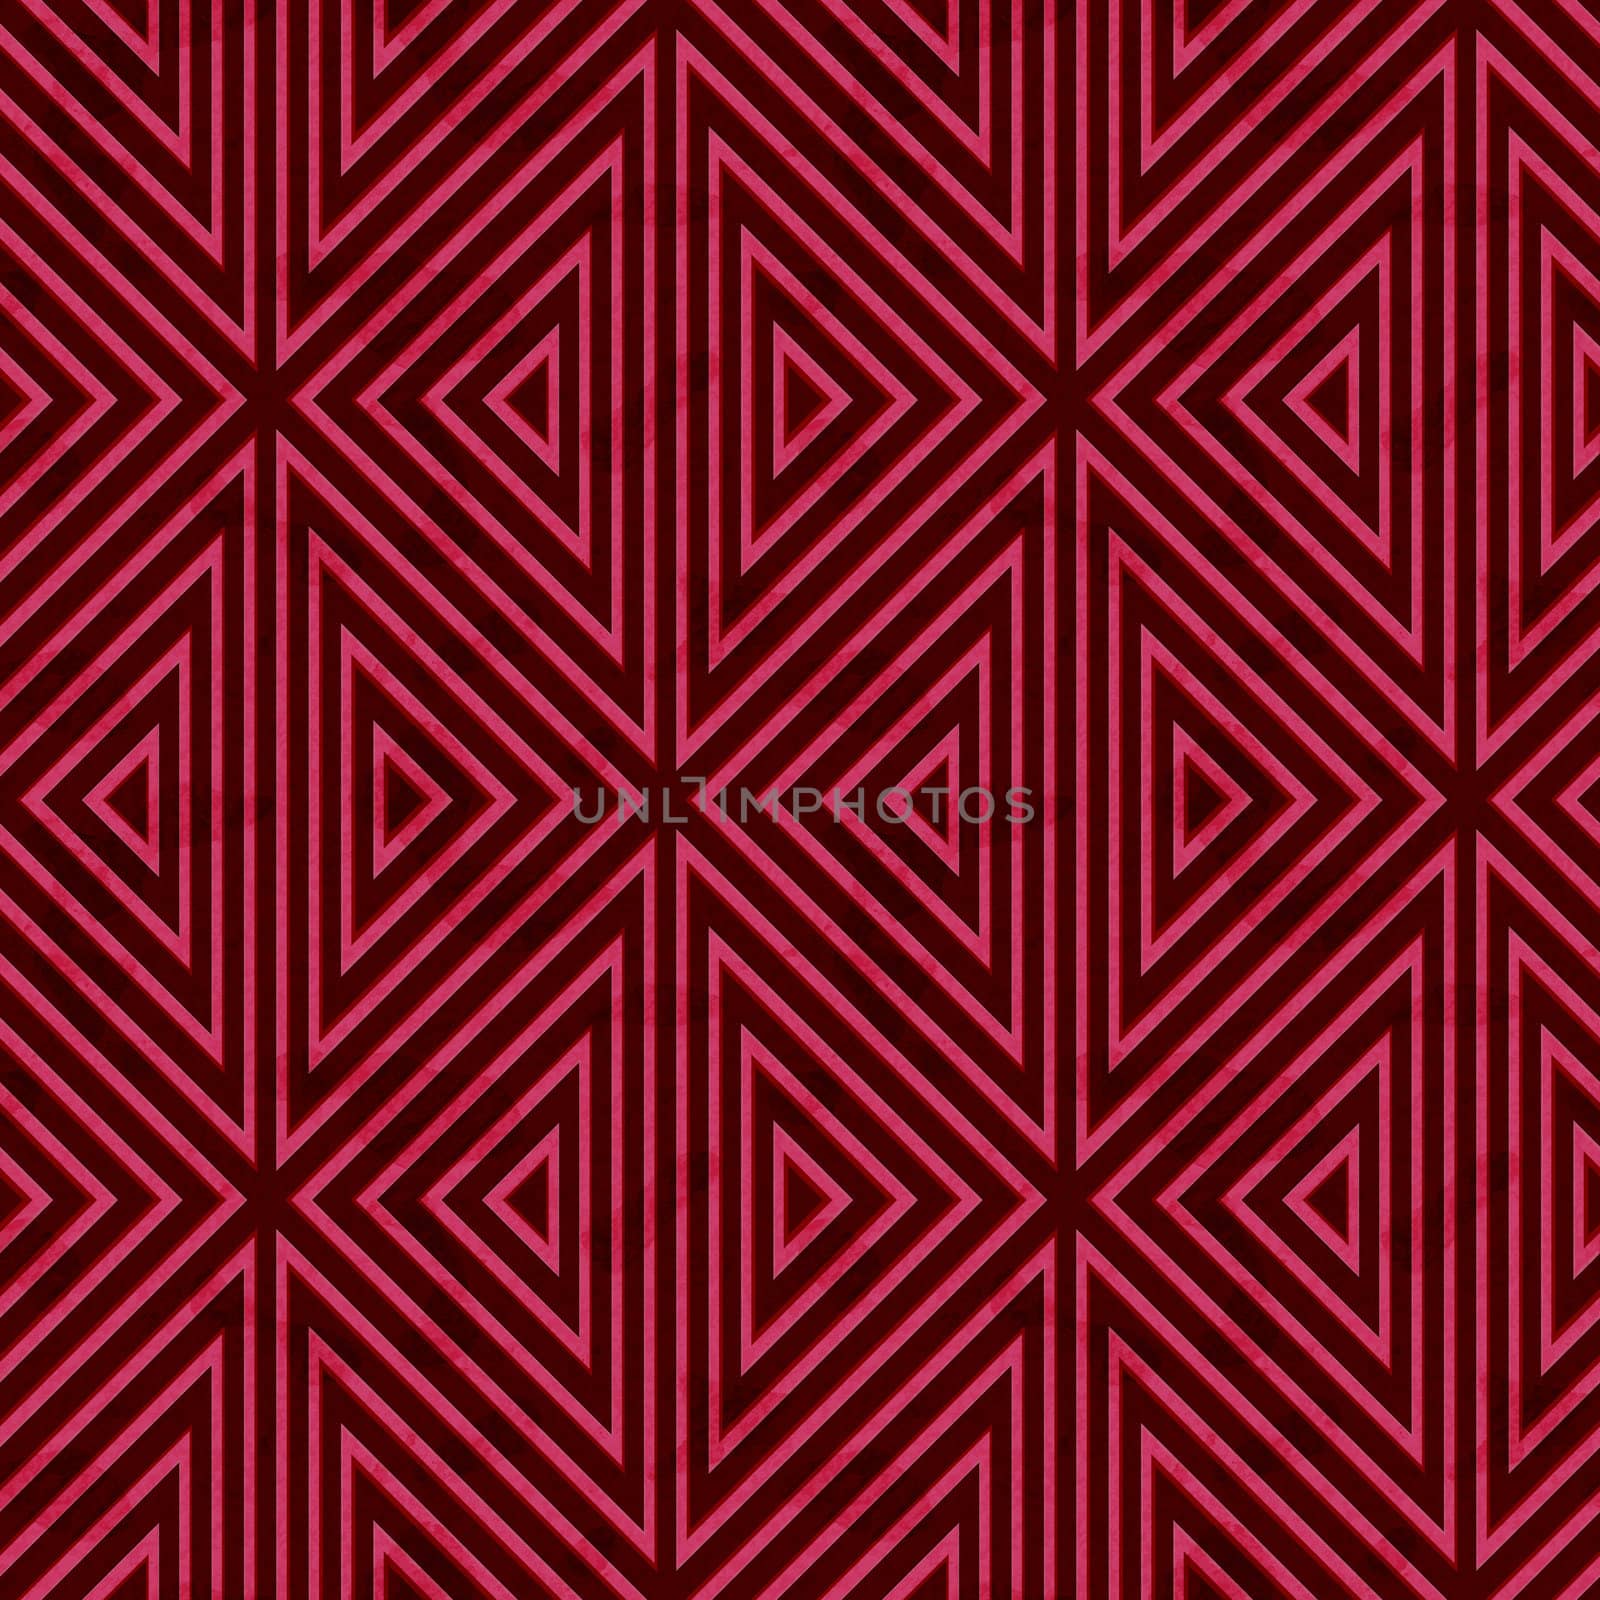 Red Lines and Triangles Geometric Seamless Pattern Bitmap Texture Illustration